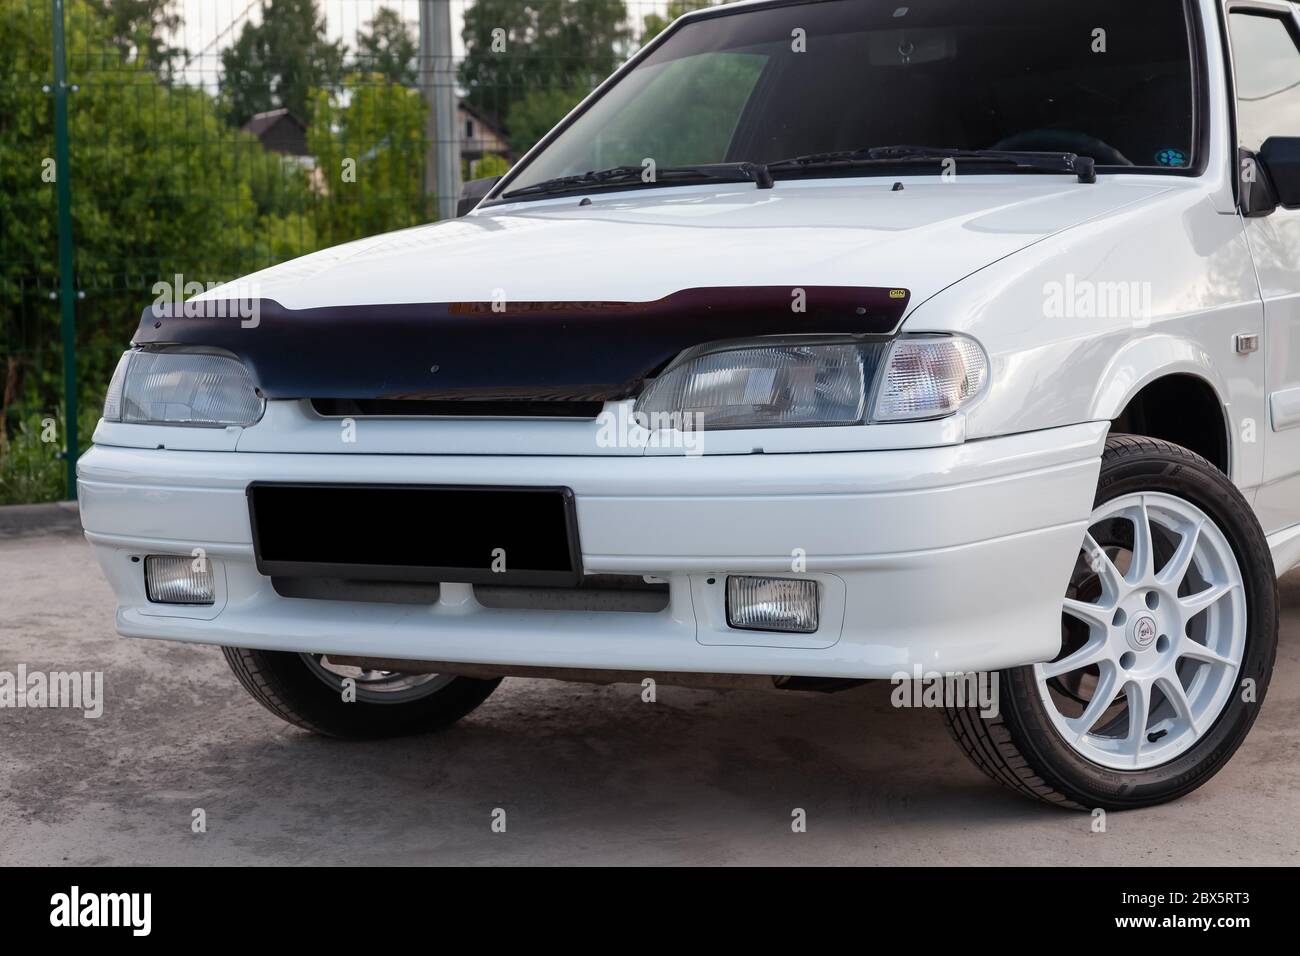 Novosibirsk, Russia - 05.20.2020: The front of the Russian car brand Lada automobile industry VAZ model 2114 of a modern series of white color and clo Stock Photo